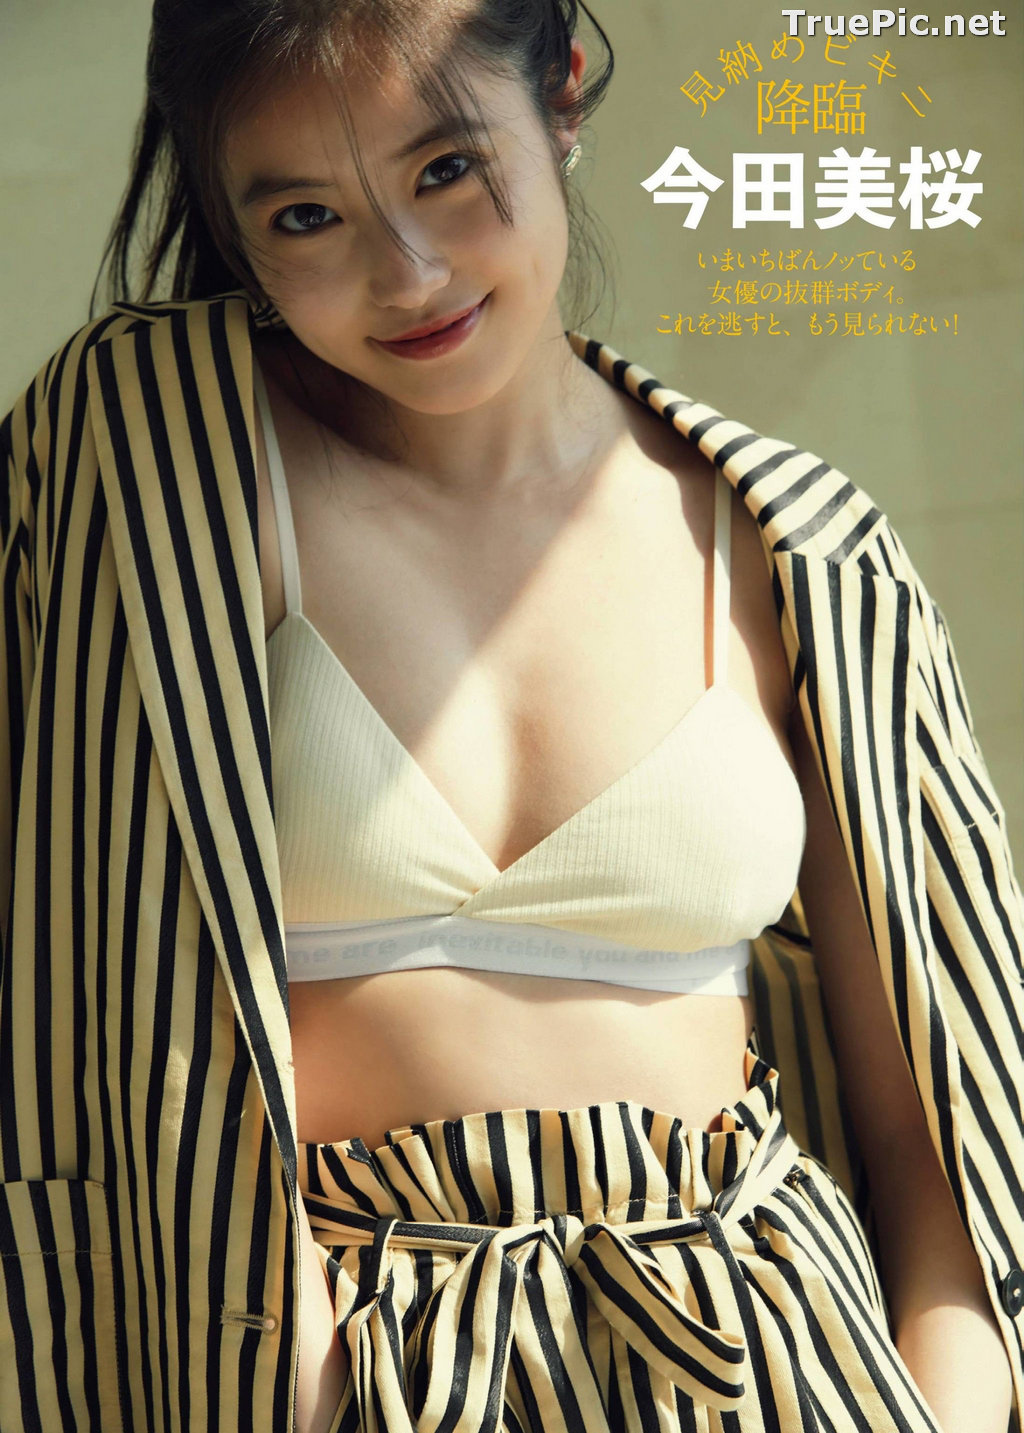 Image Japanese Actress and Model - Mio Imada (今田美櫻) - Sexy Picture Collection 2020 - TruePic.net - Picture-91